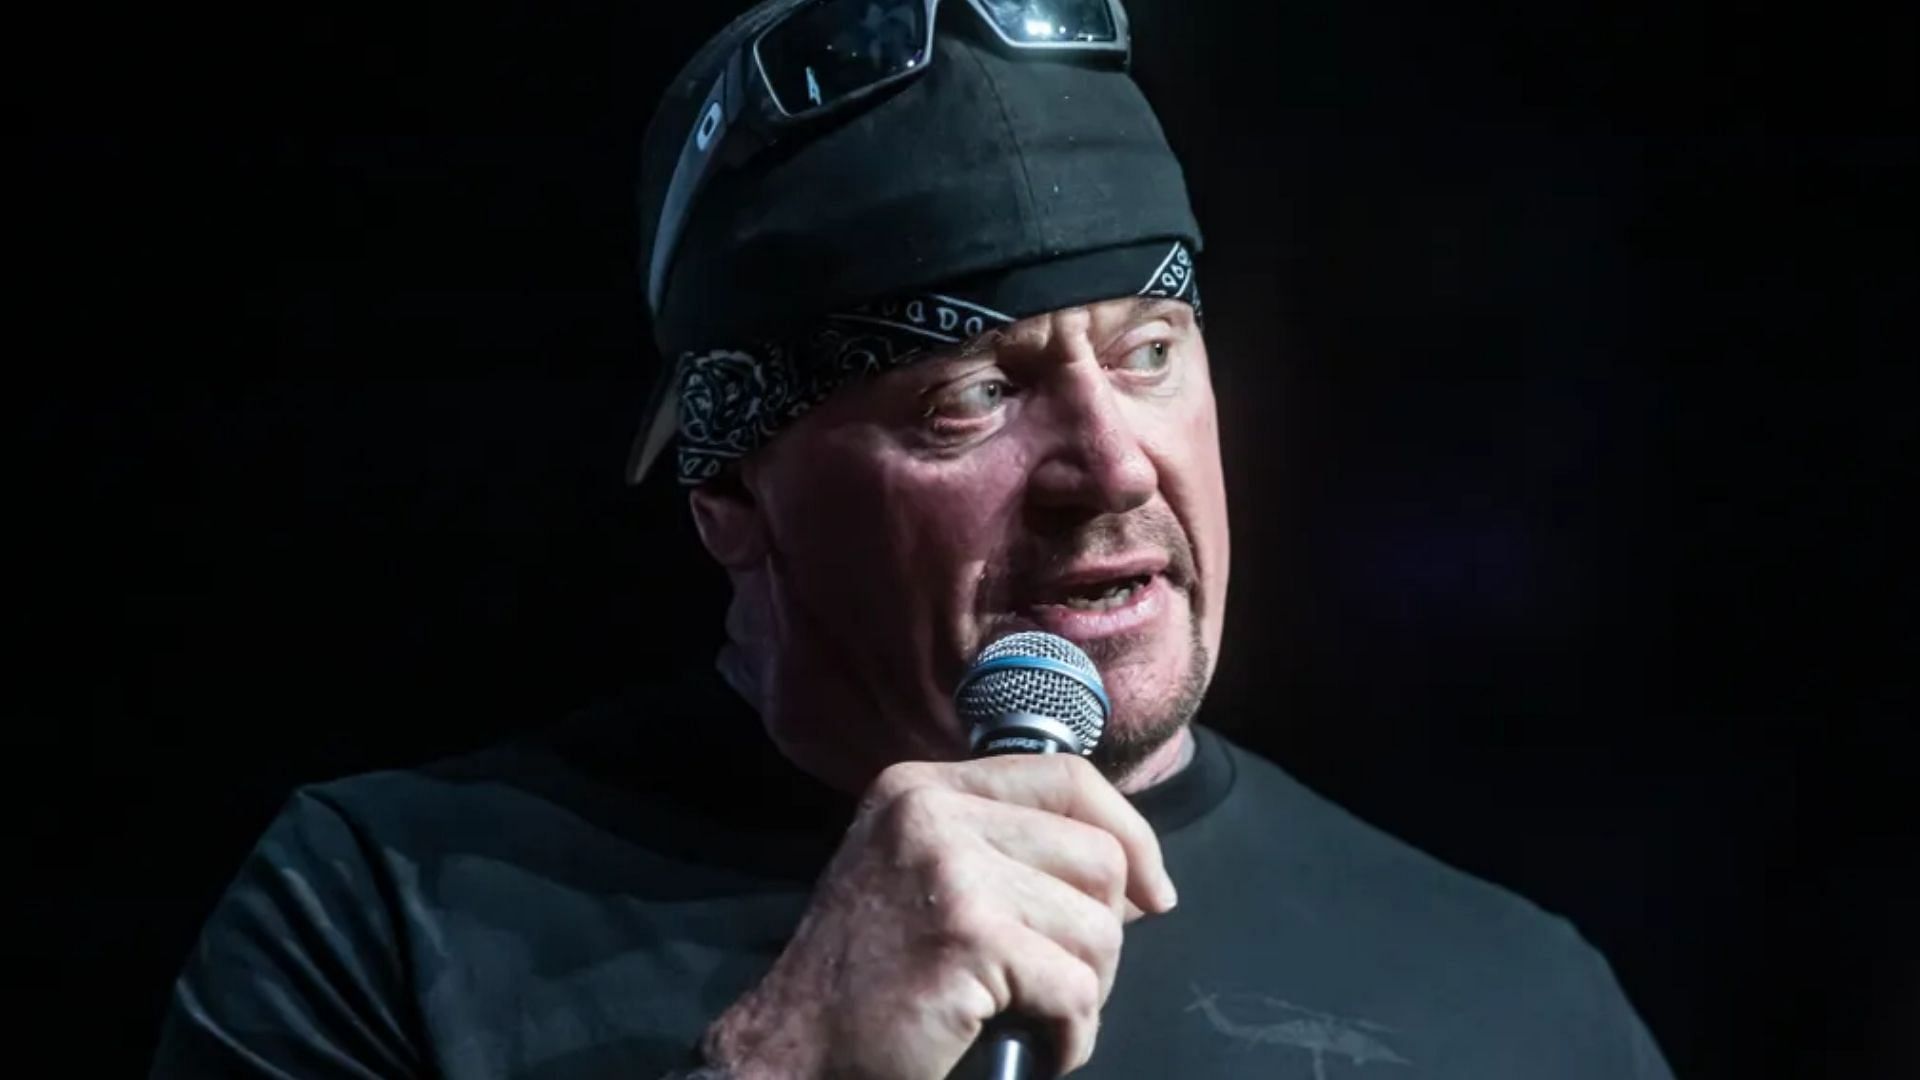 The Undertaker retired from in-ring competition